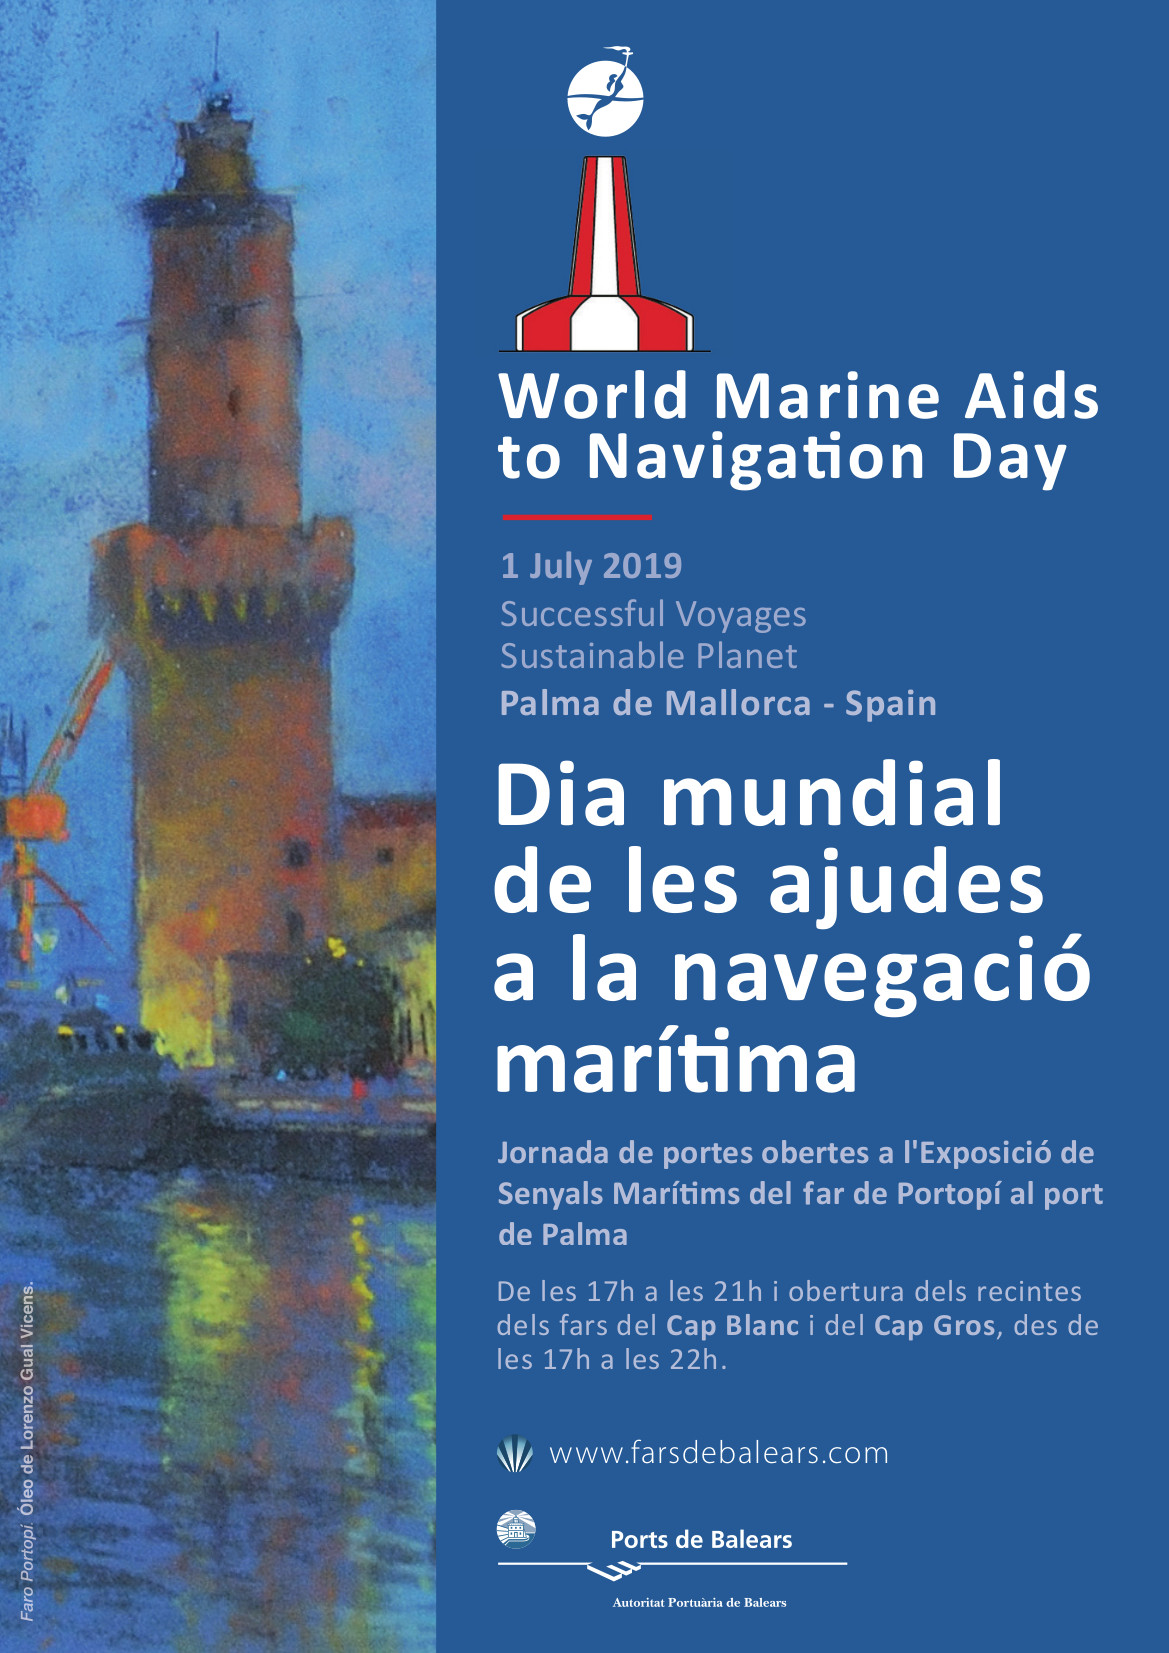 APB STAGES EVENTS TO COMMEMORATE THE WORLD MARINE AIDS TO NAVIGATION DAY WITH ACTIVITIES ORGANISED IN ALL THE BALEARIC ISLES